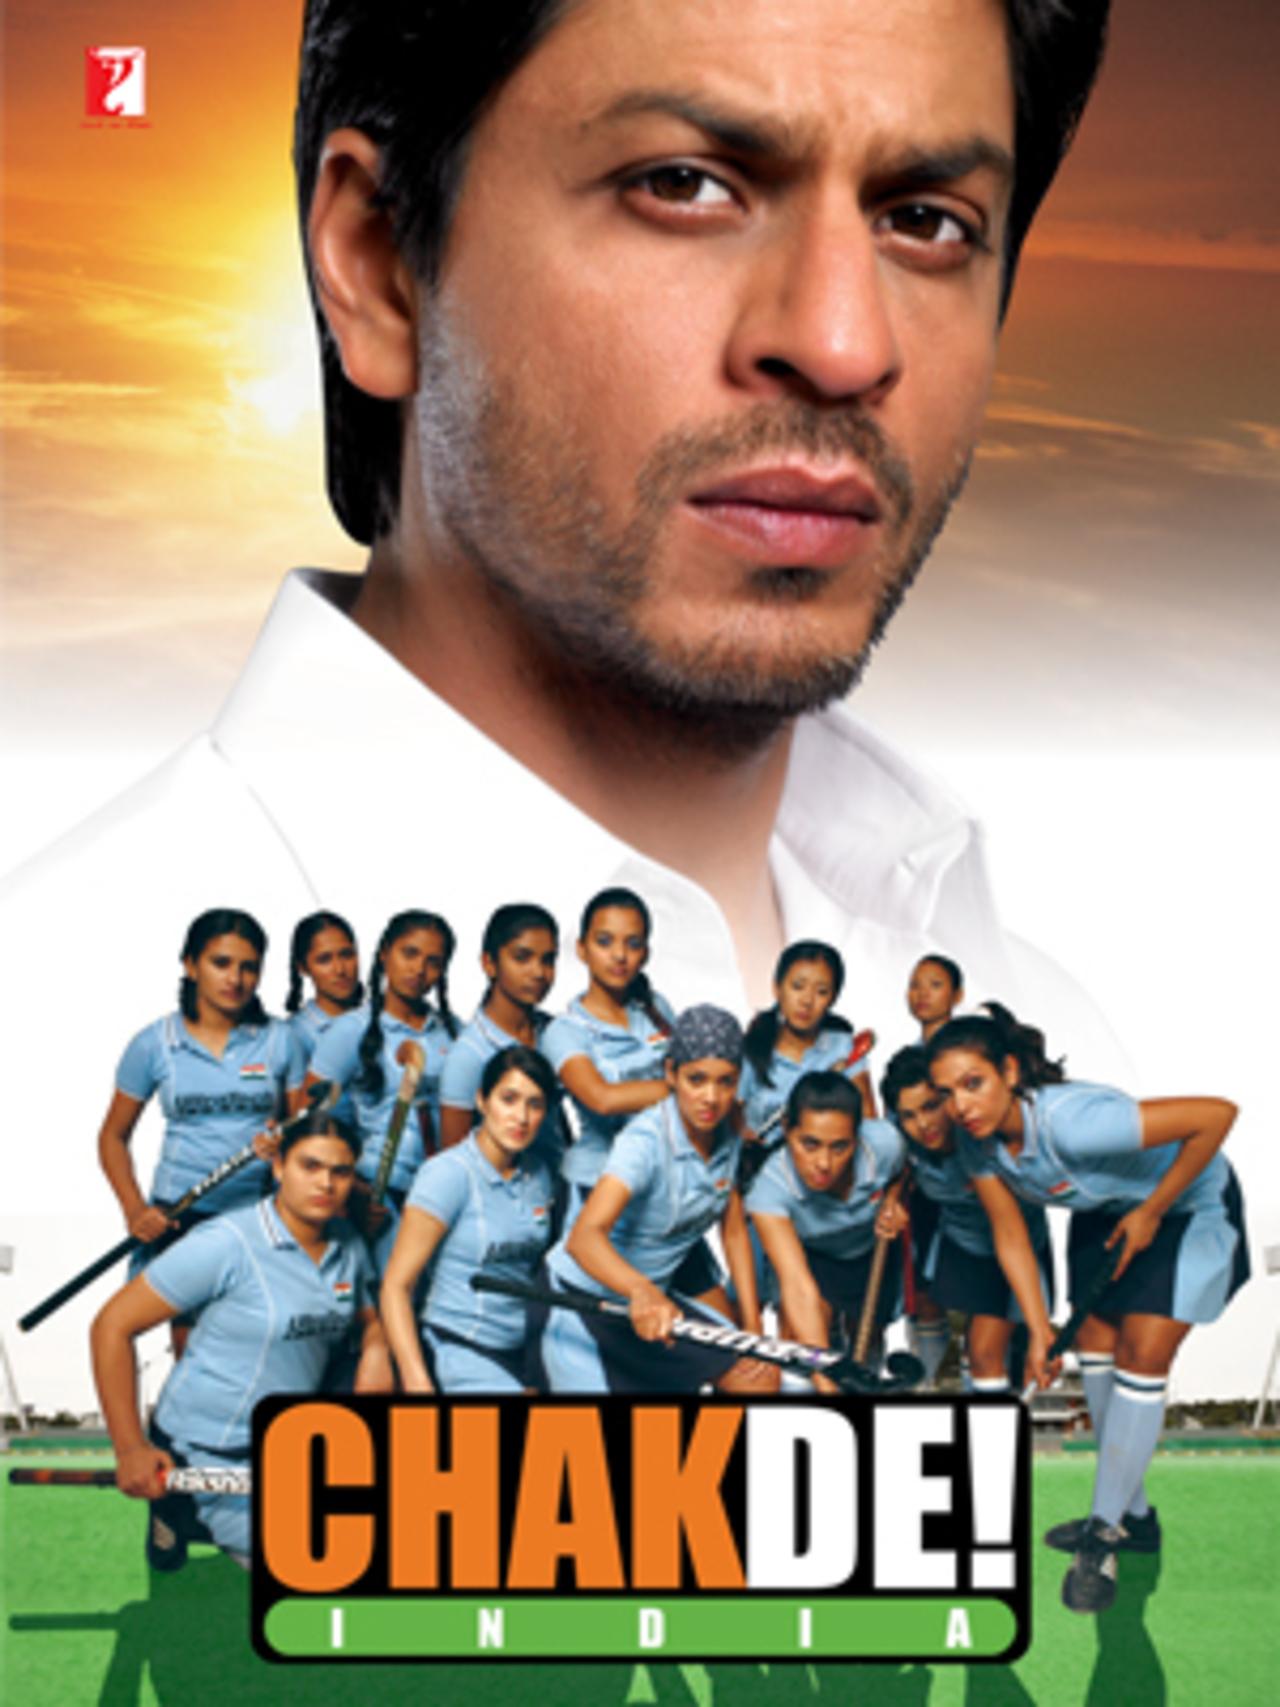 ‘Chak De India’ is the title track of the 2007 Bollywood sports film ‘Chak De! India’. The film was directed by Shimit Amin and produced by Yash Raj Films. It stars Shah Rukh Khan in the lead role as the coach of the Indian women's national hockey team